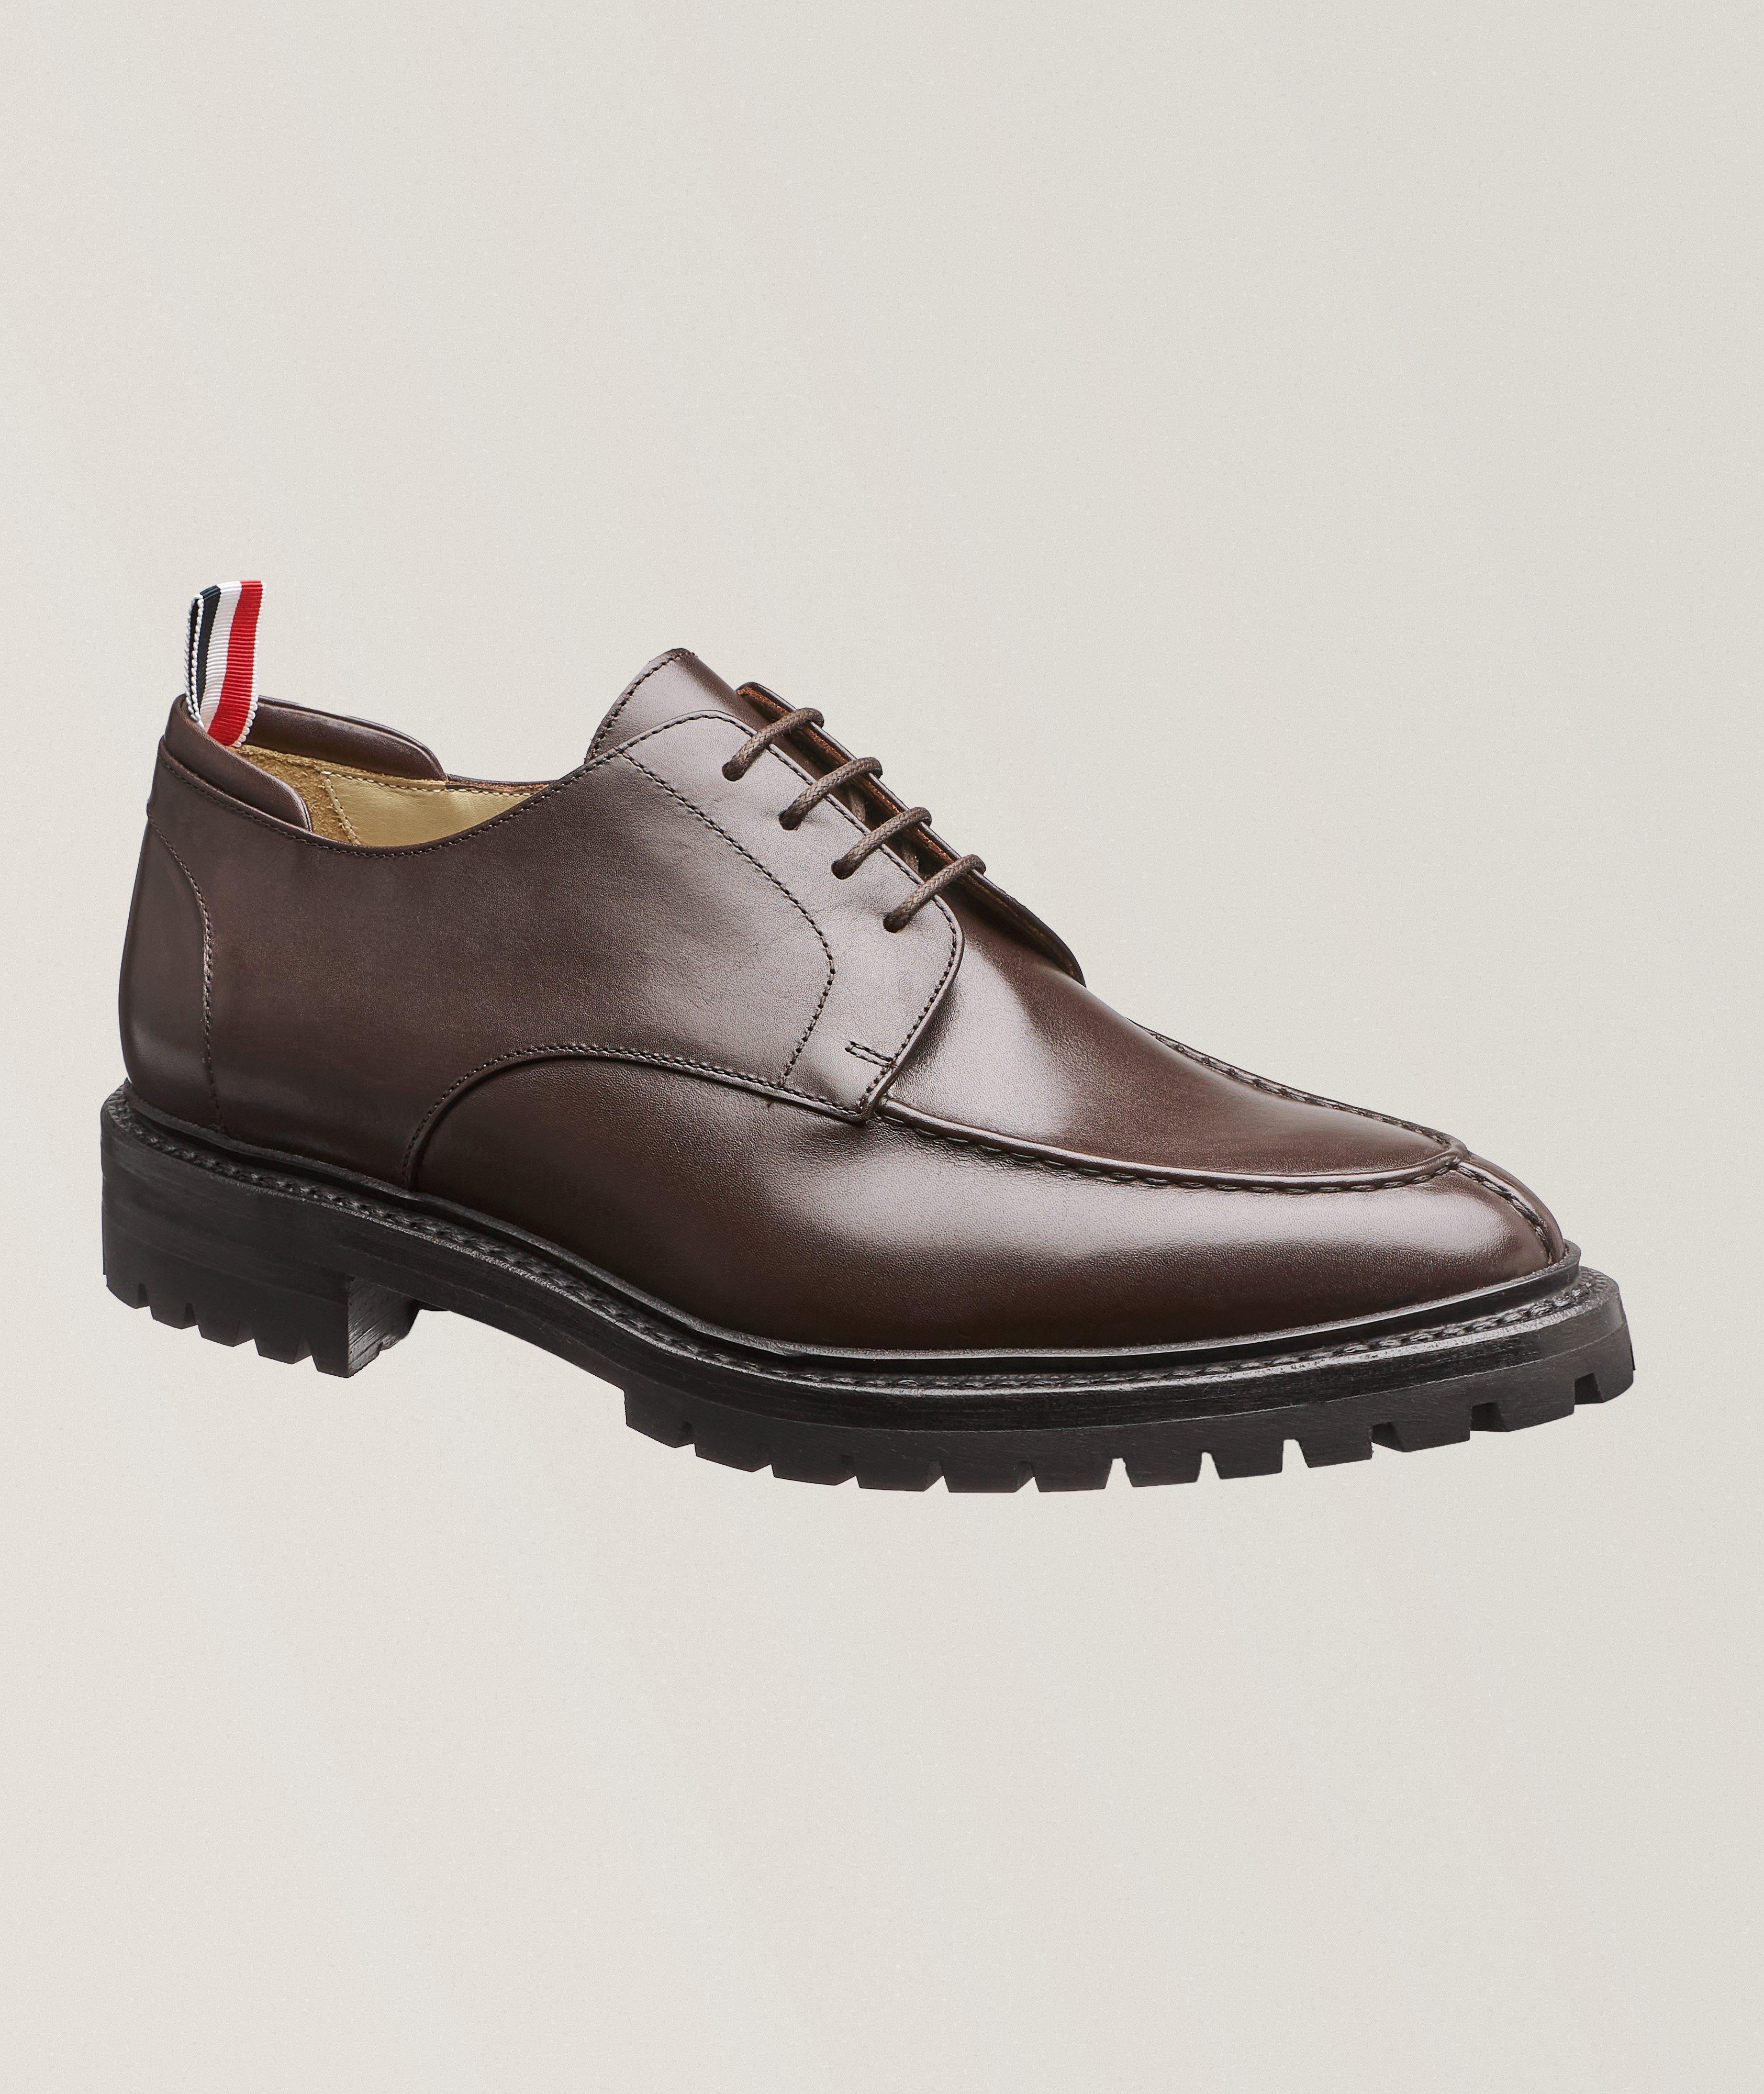 Classic Calf Leather Derbies image 0